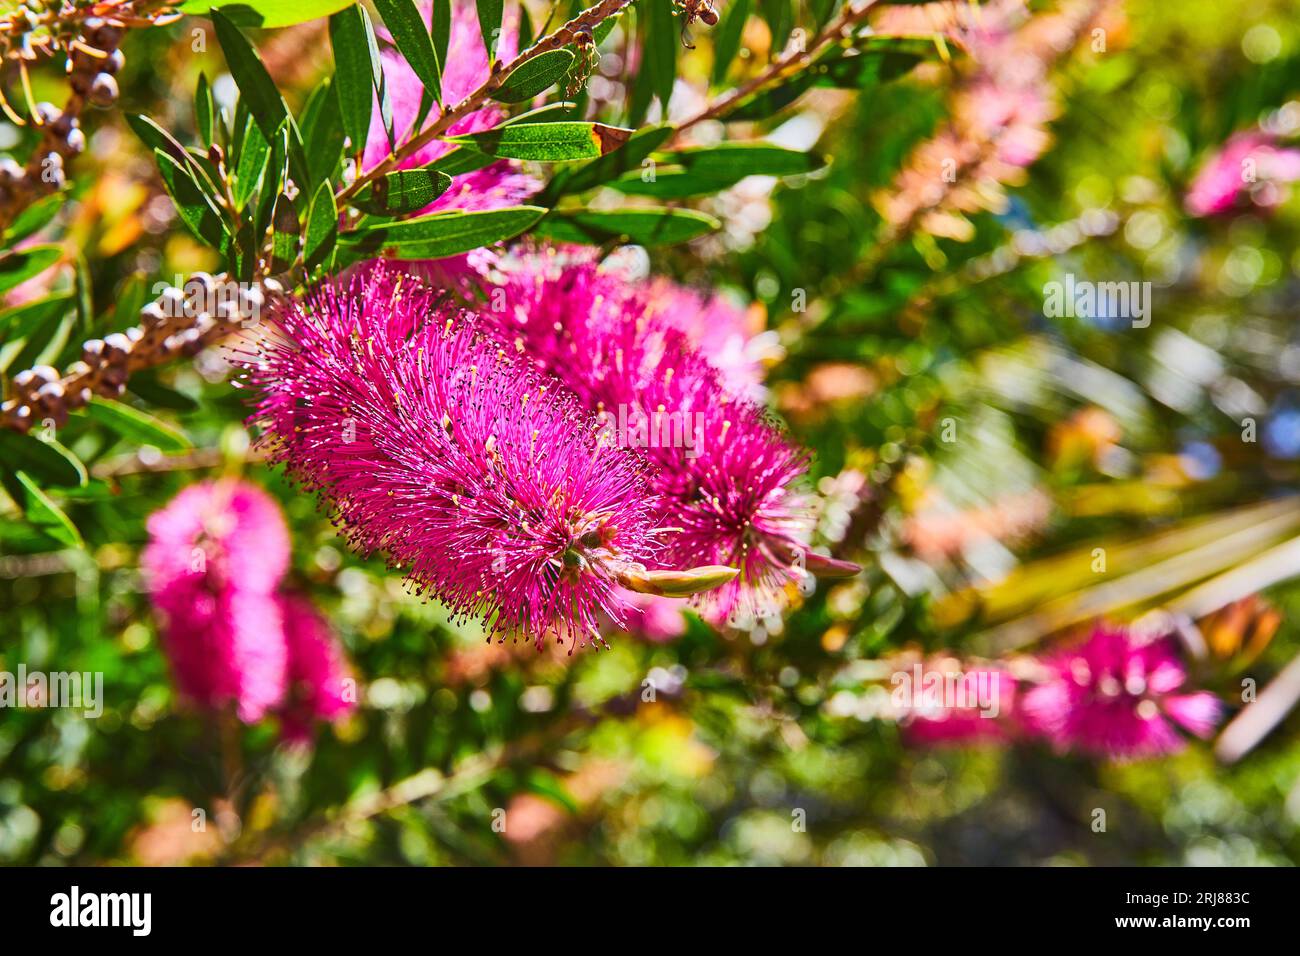 Bright purple or magenta flowers in shape of bristle brush close up with blurred green background Stock Photo